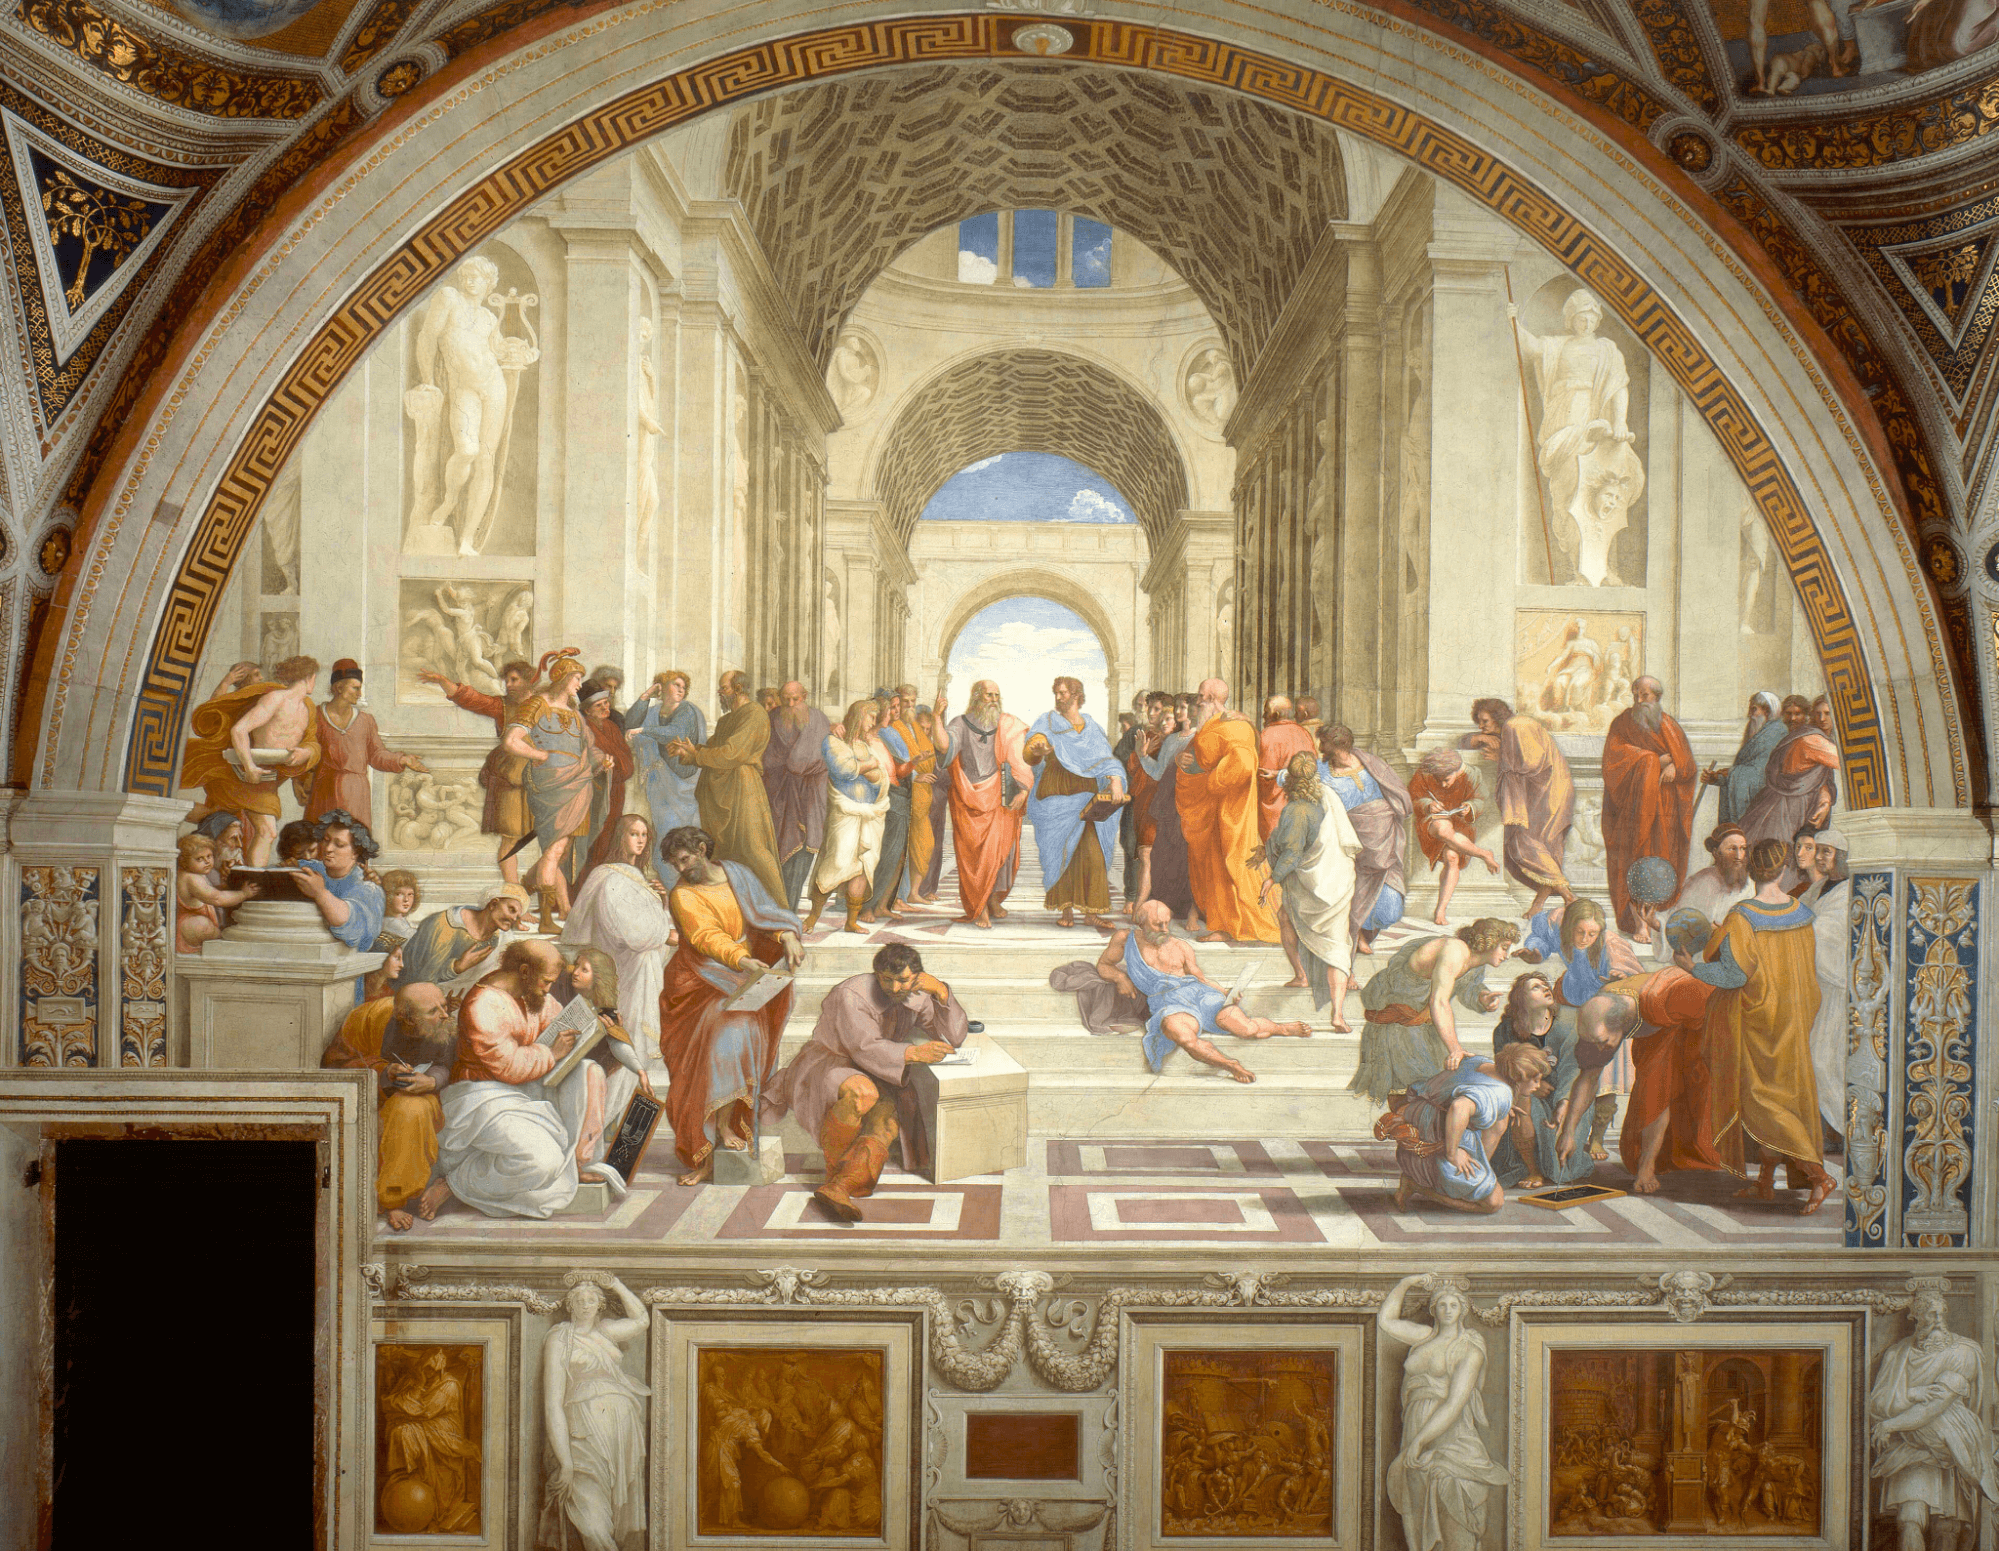 Art History Timeline The School of Athens by Raphael